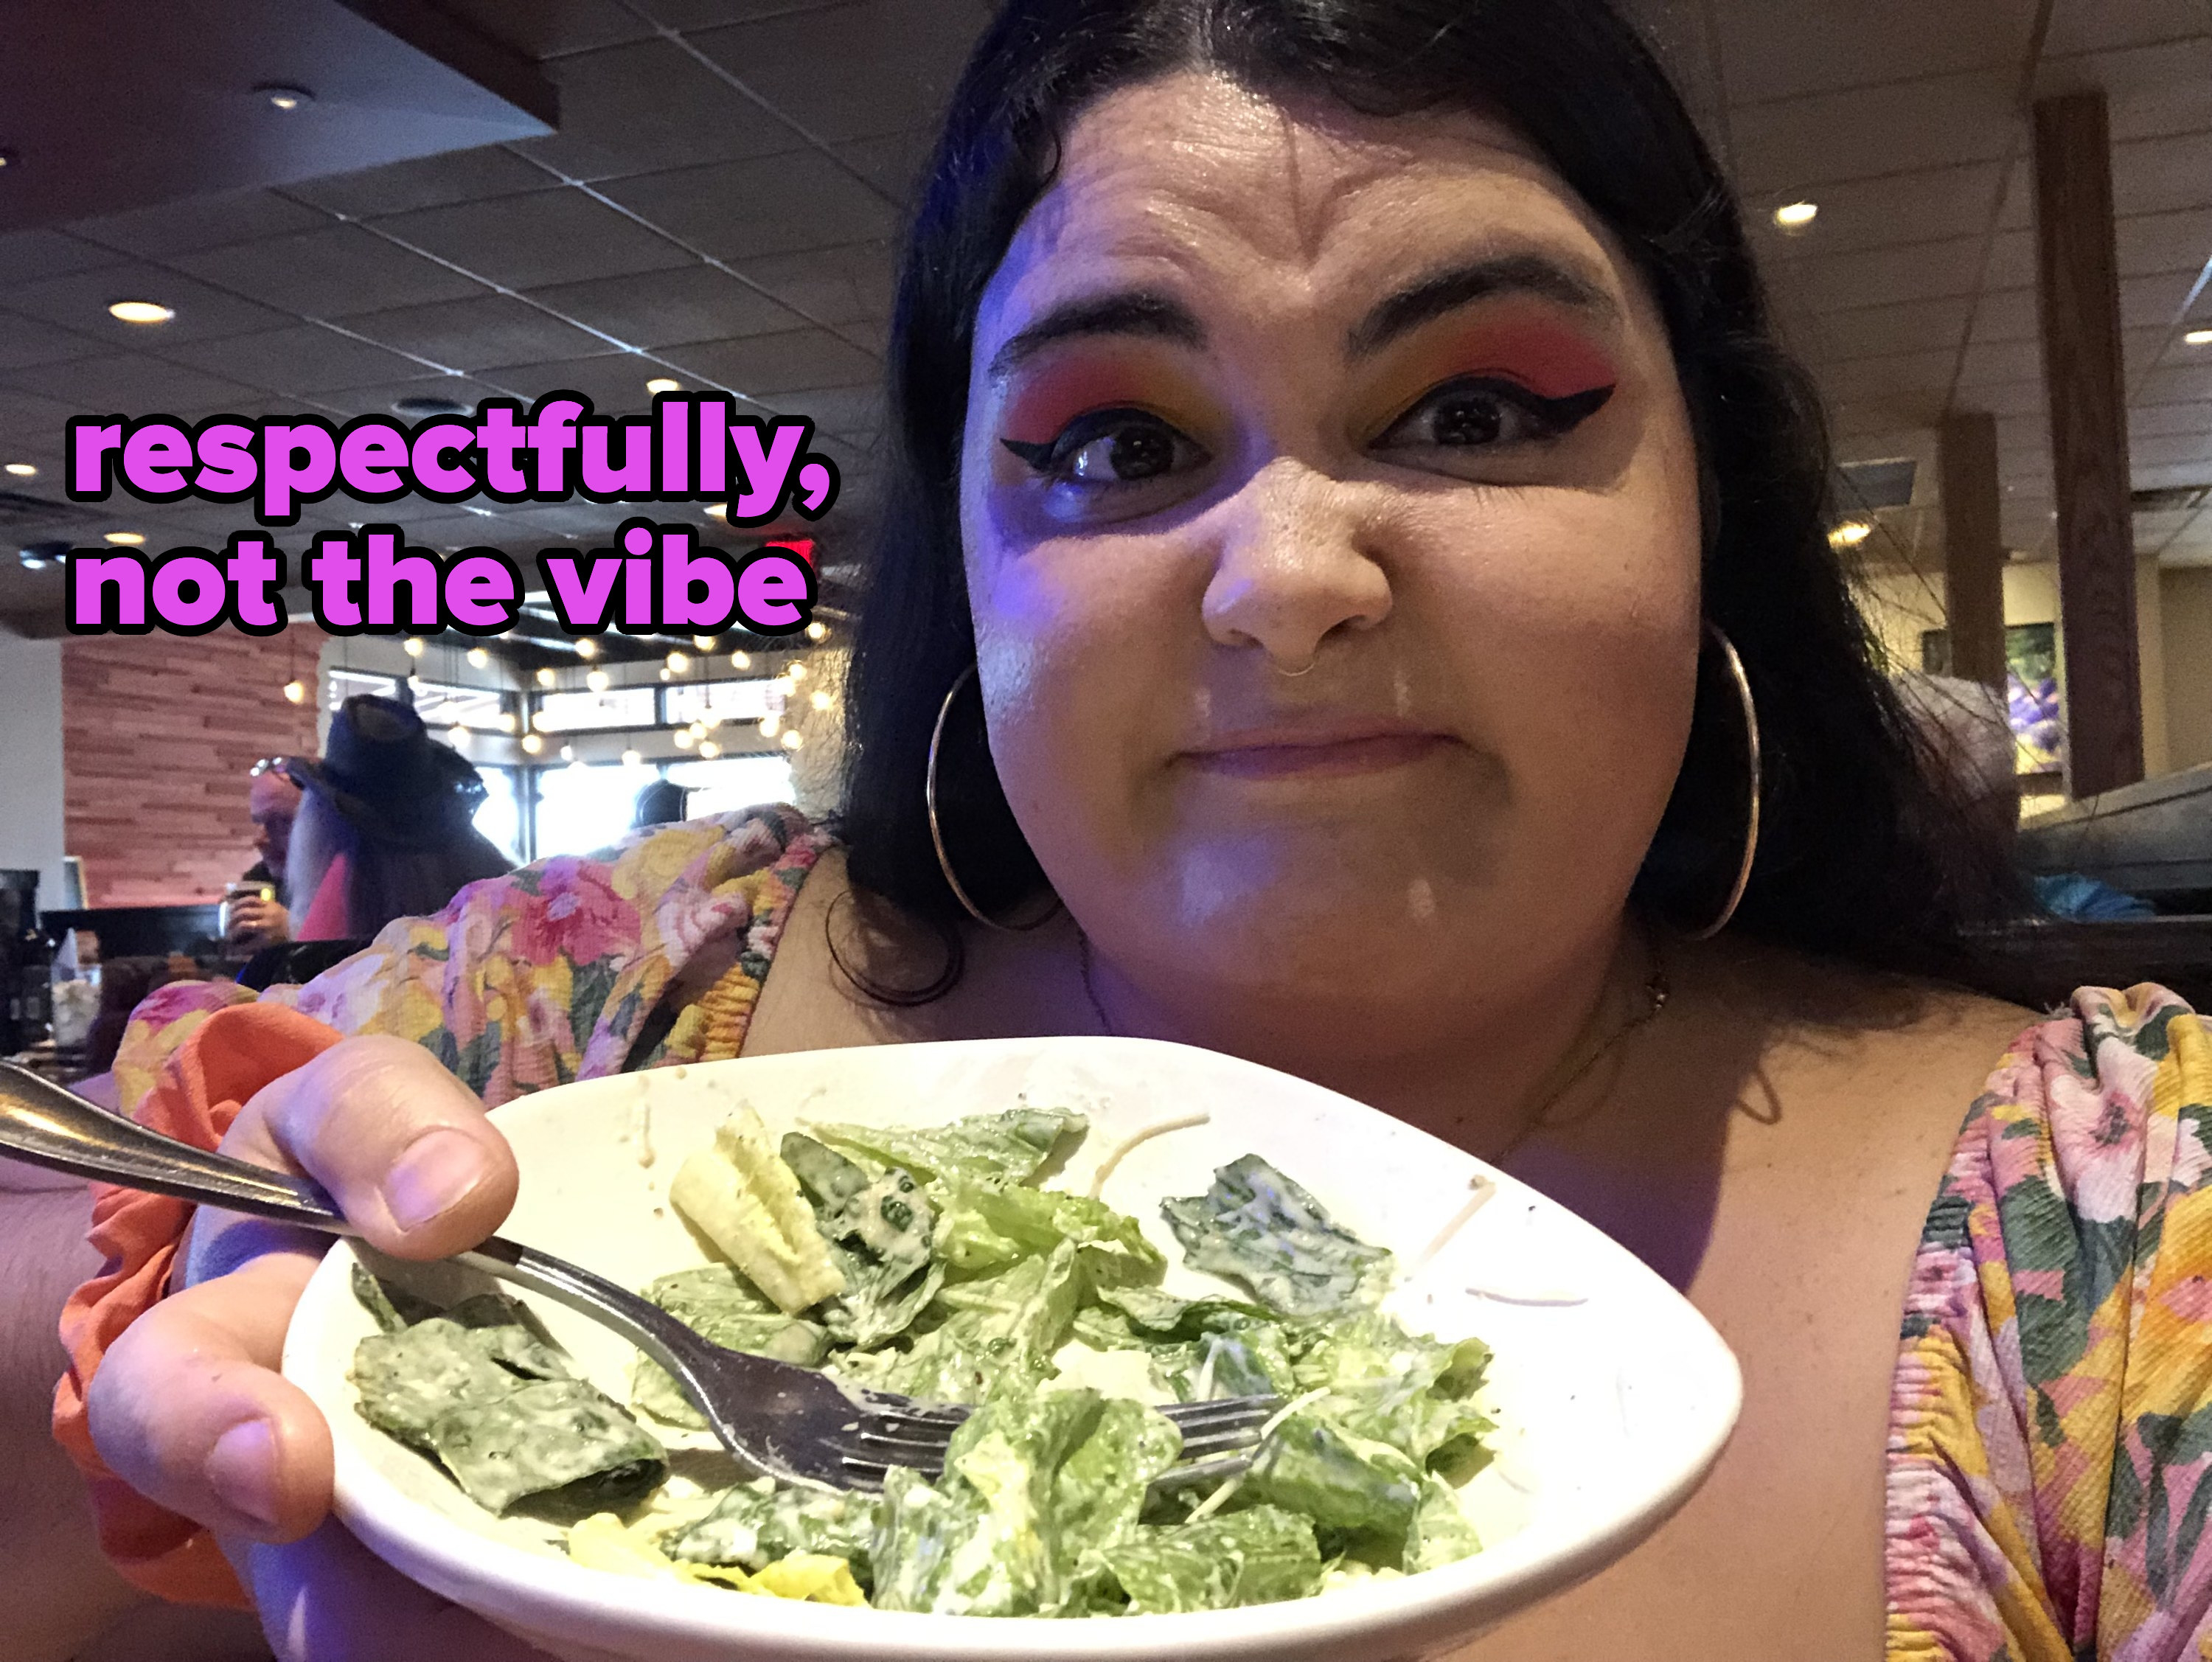 woman holding up plate of caesar salad with disappointed face and text that says &quot;respectfully, not the vibe&quot;